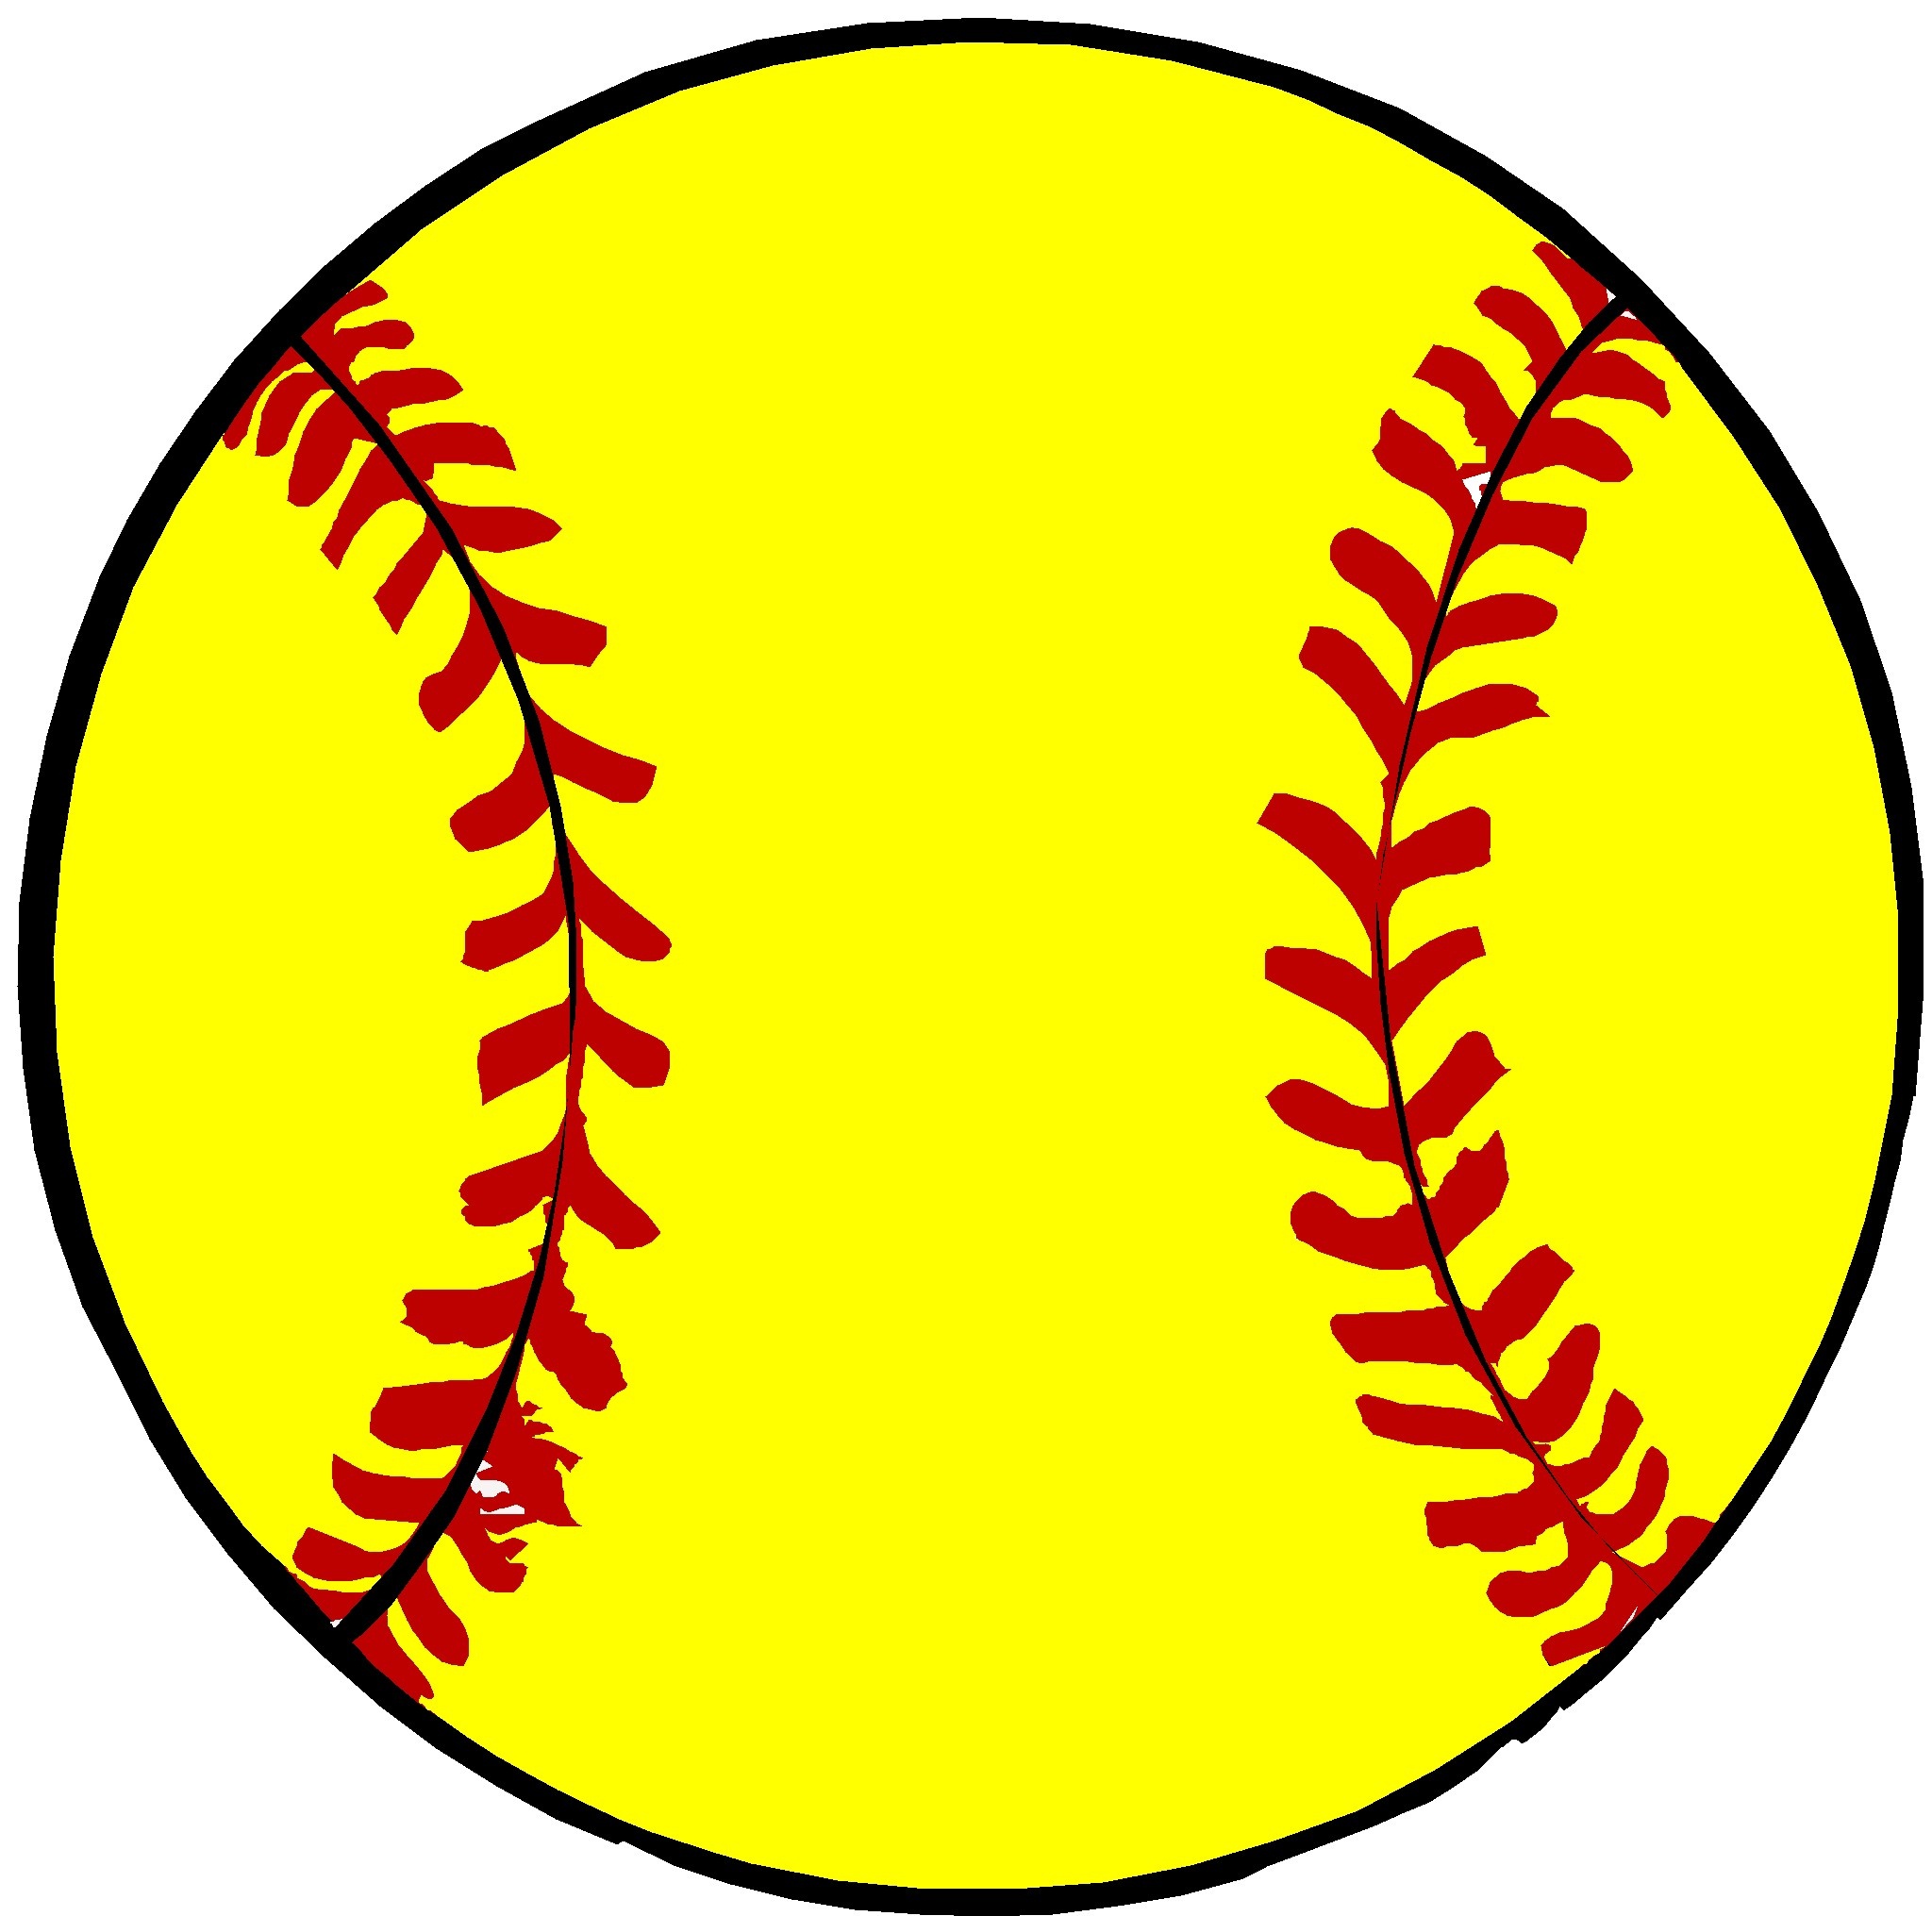 Free Softball Clipart | Free Download Best Free Softball Clipart On - Free Printable Softball Pictures